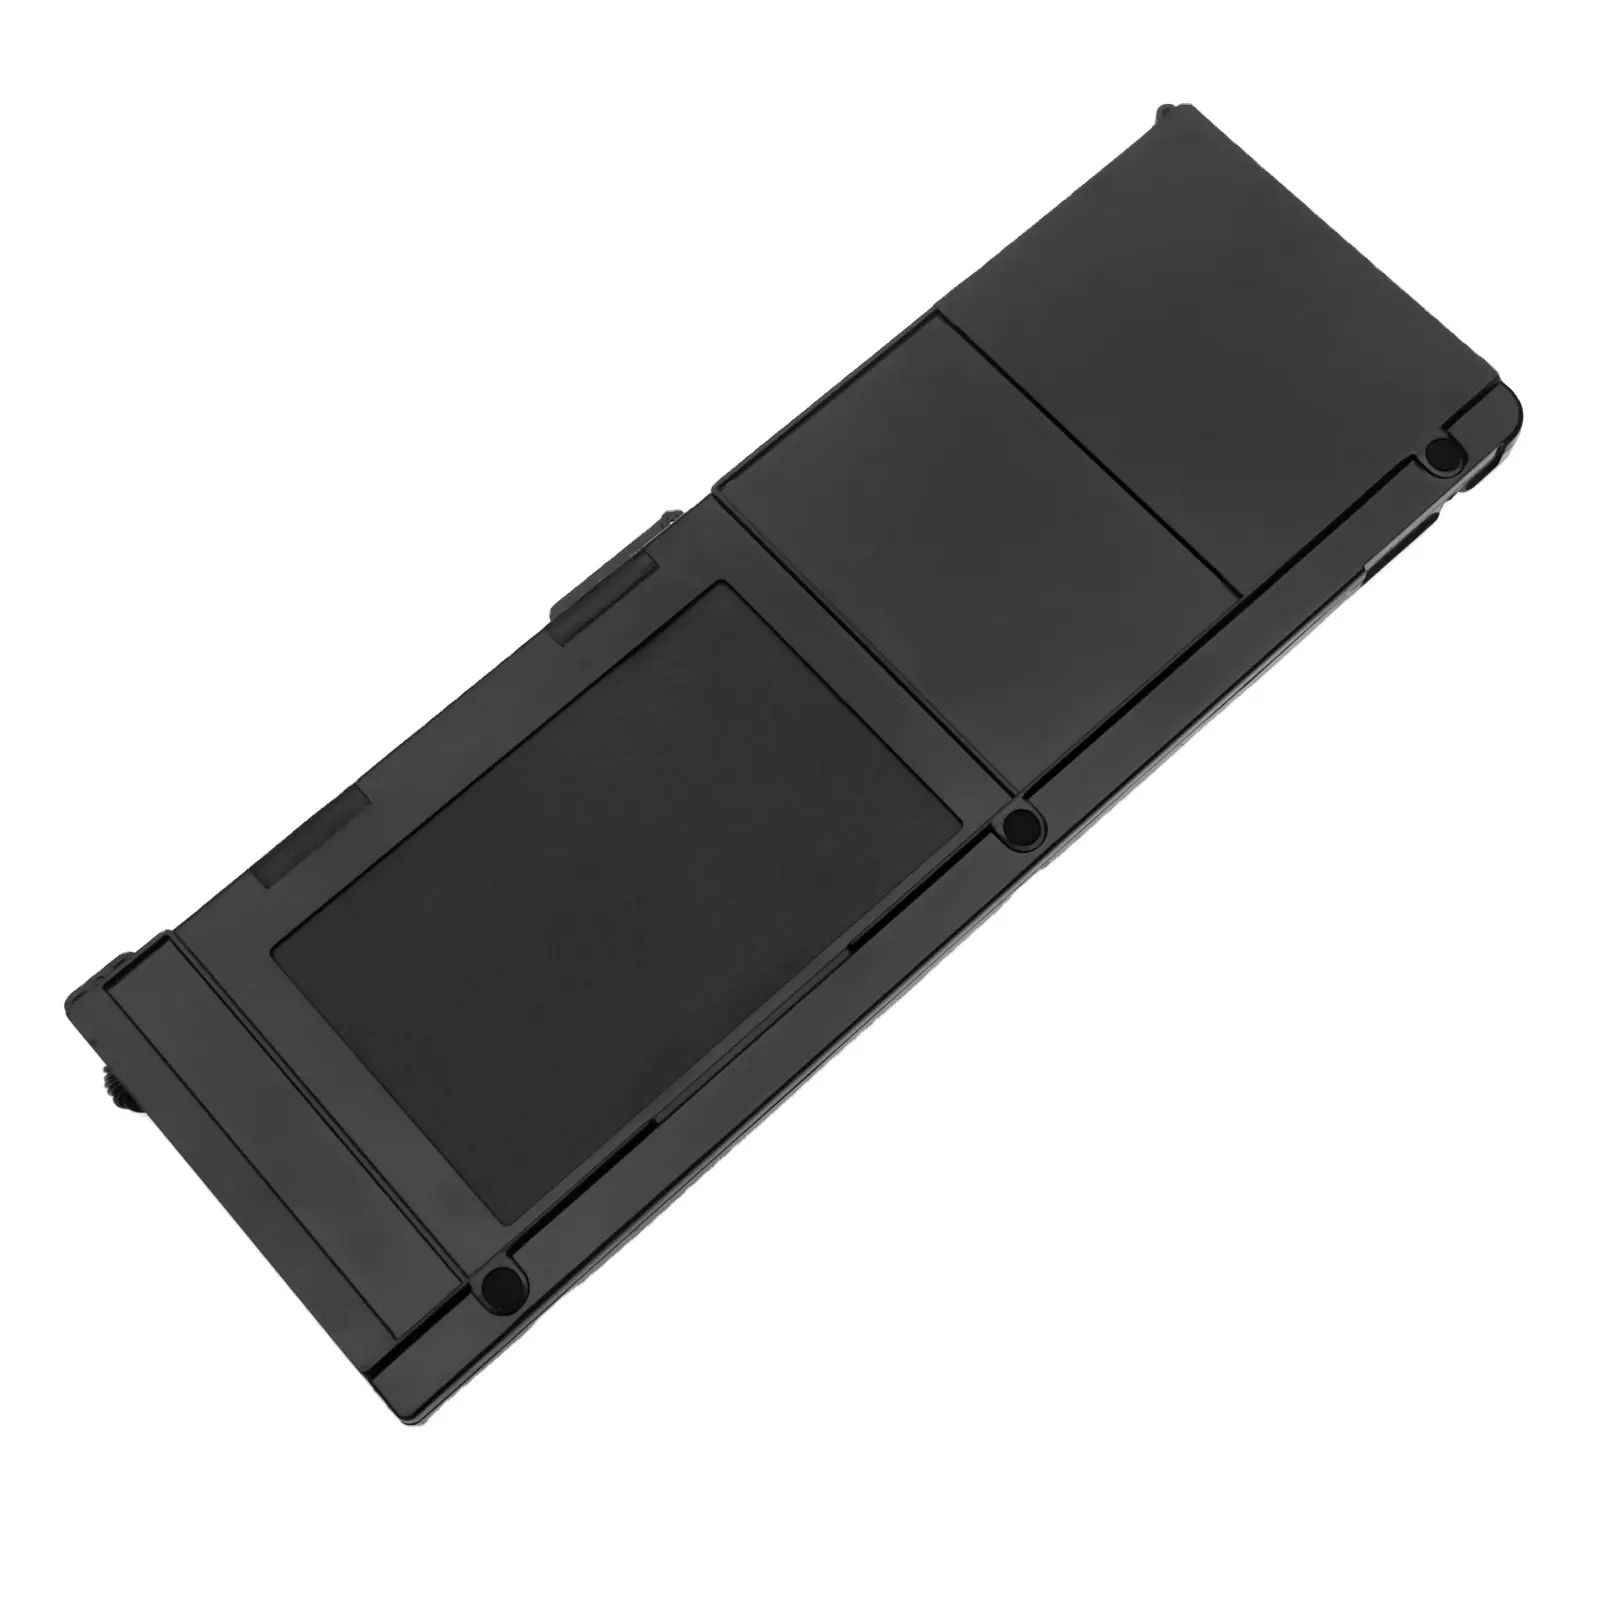 DNS mac laptop battery A1309 replacement for MacBook A1297 PRO 17 inch 2009 2010 battery A1309